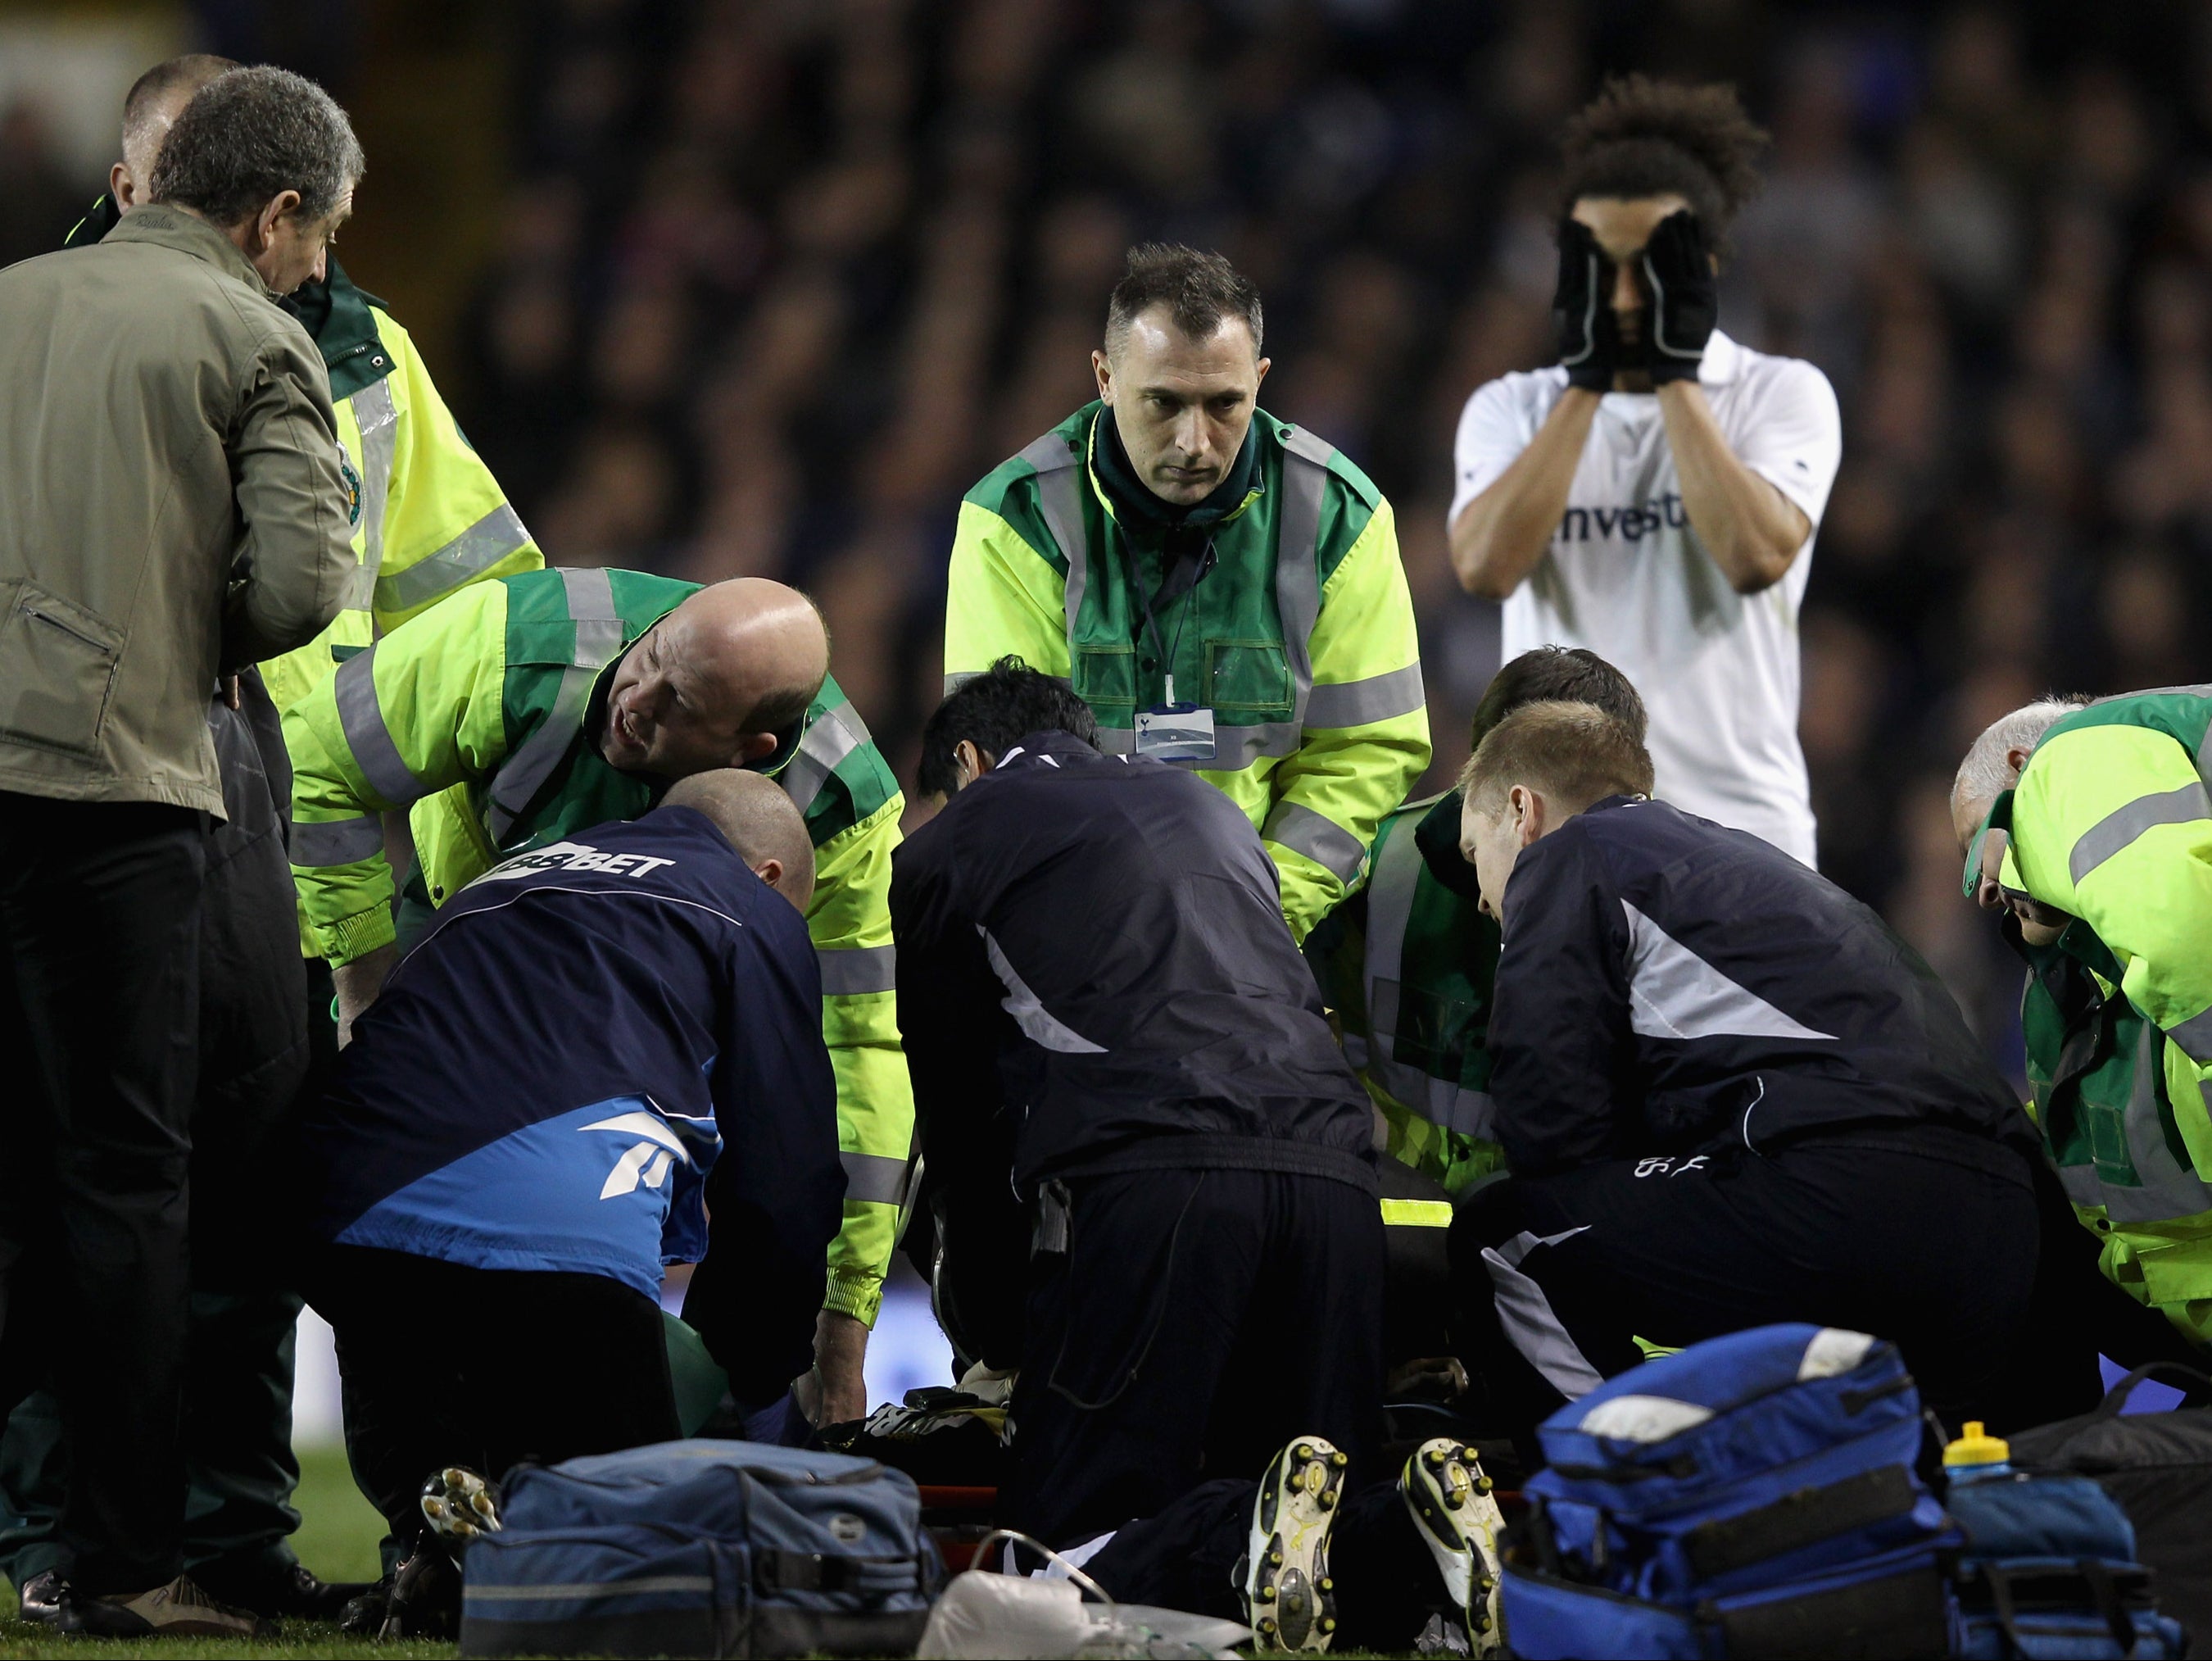 Fabrice Muamba receives CPR after collapsing on the pitch at White Hart Lane on 17 March 2012